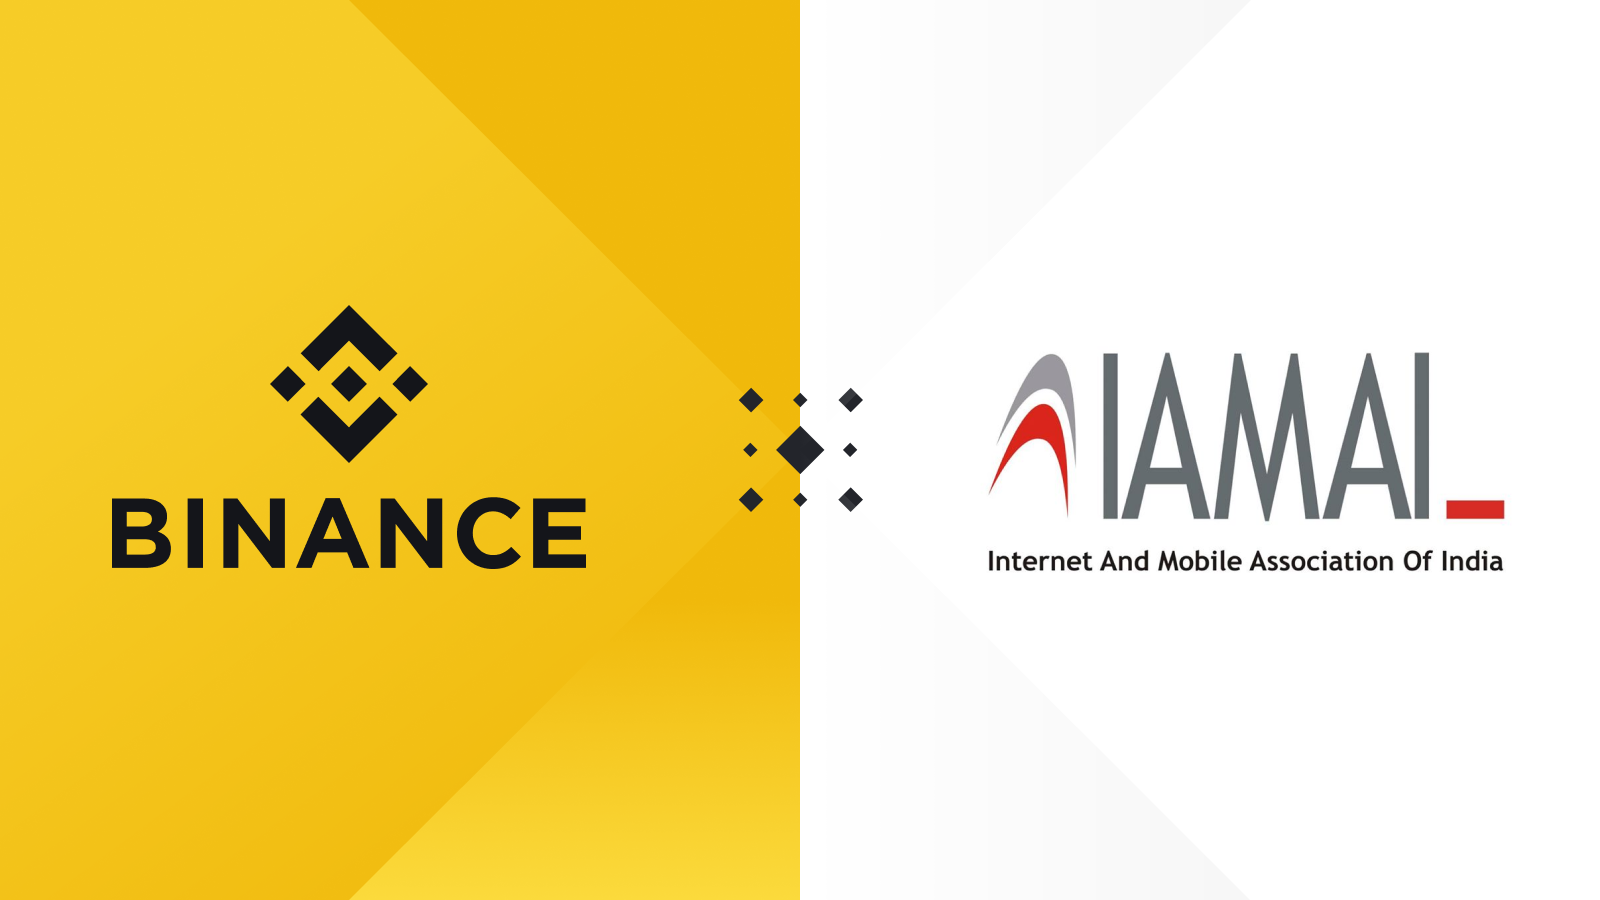 Binance Joins the Internet and Mobile Association of India ...